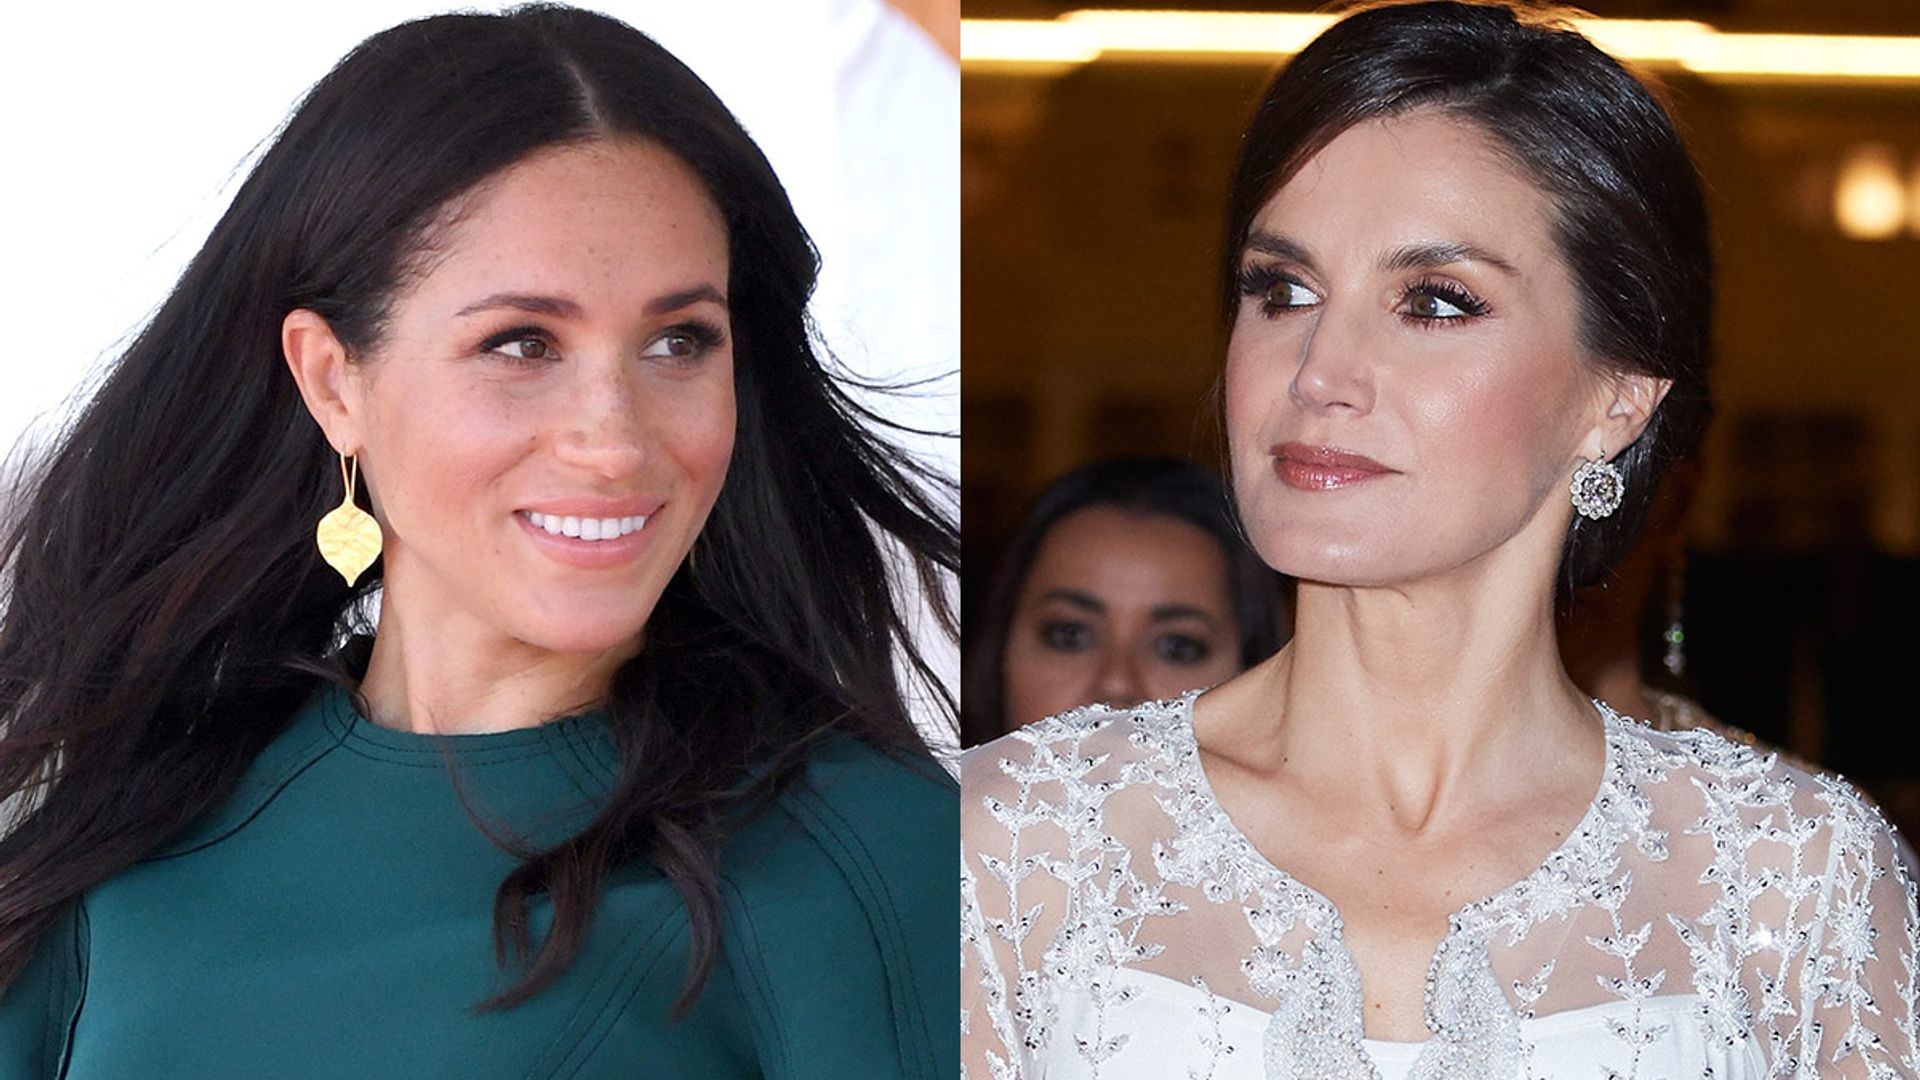 Queen Letizia has these 5 style tips for Meghan Markle in Morocco | HELLO!